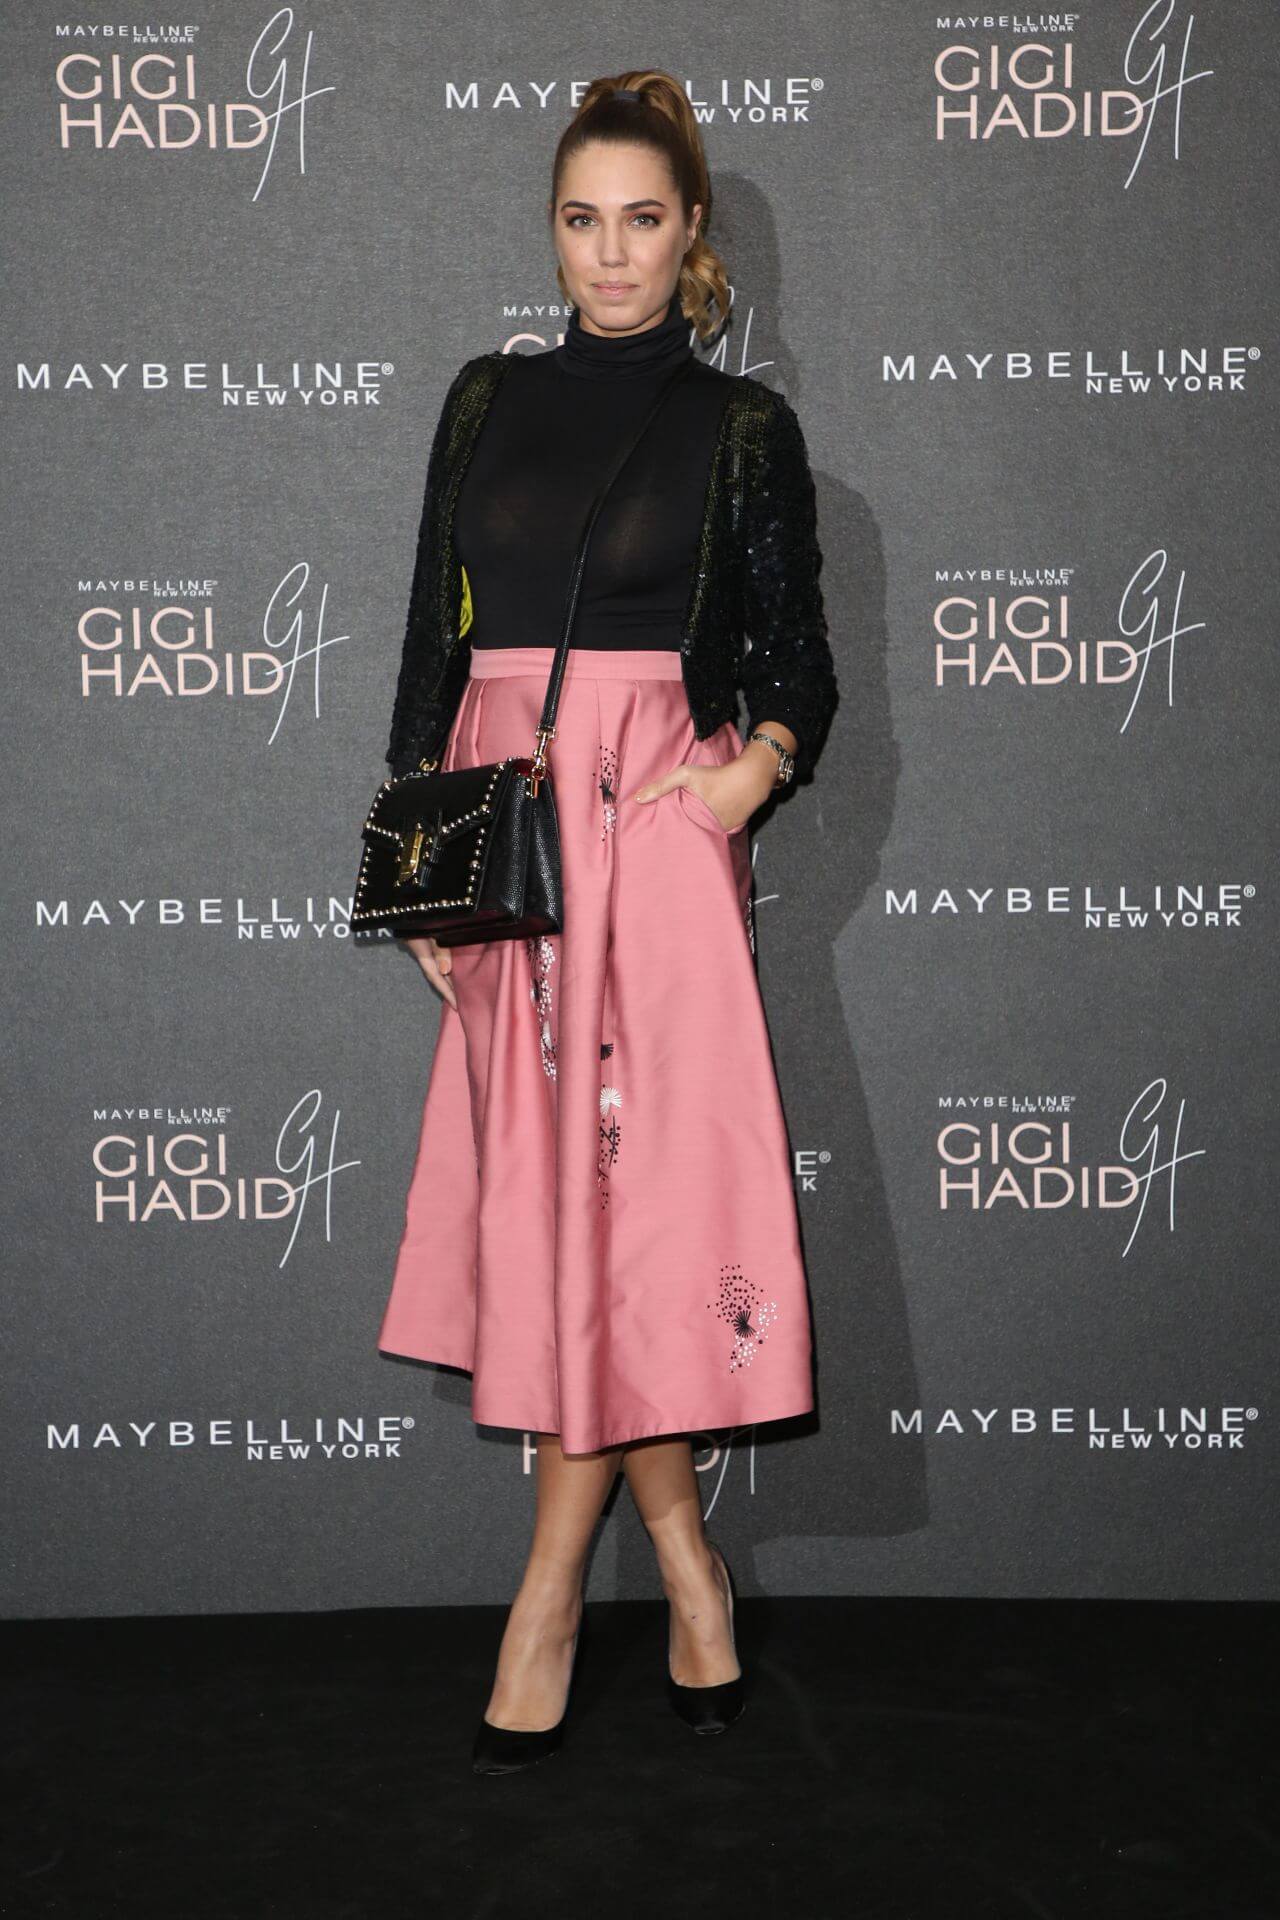 Amber Le Bon In Black Shiny High Neck Top With Pink Skirt Outfits At Gigi Hadid X Maybelline Party in London